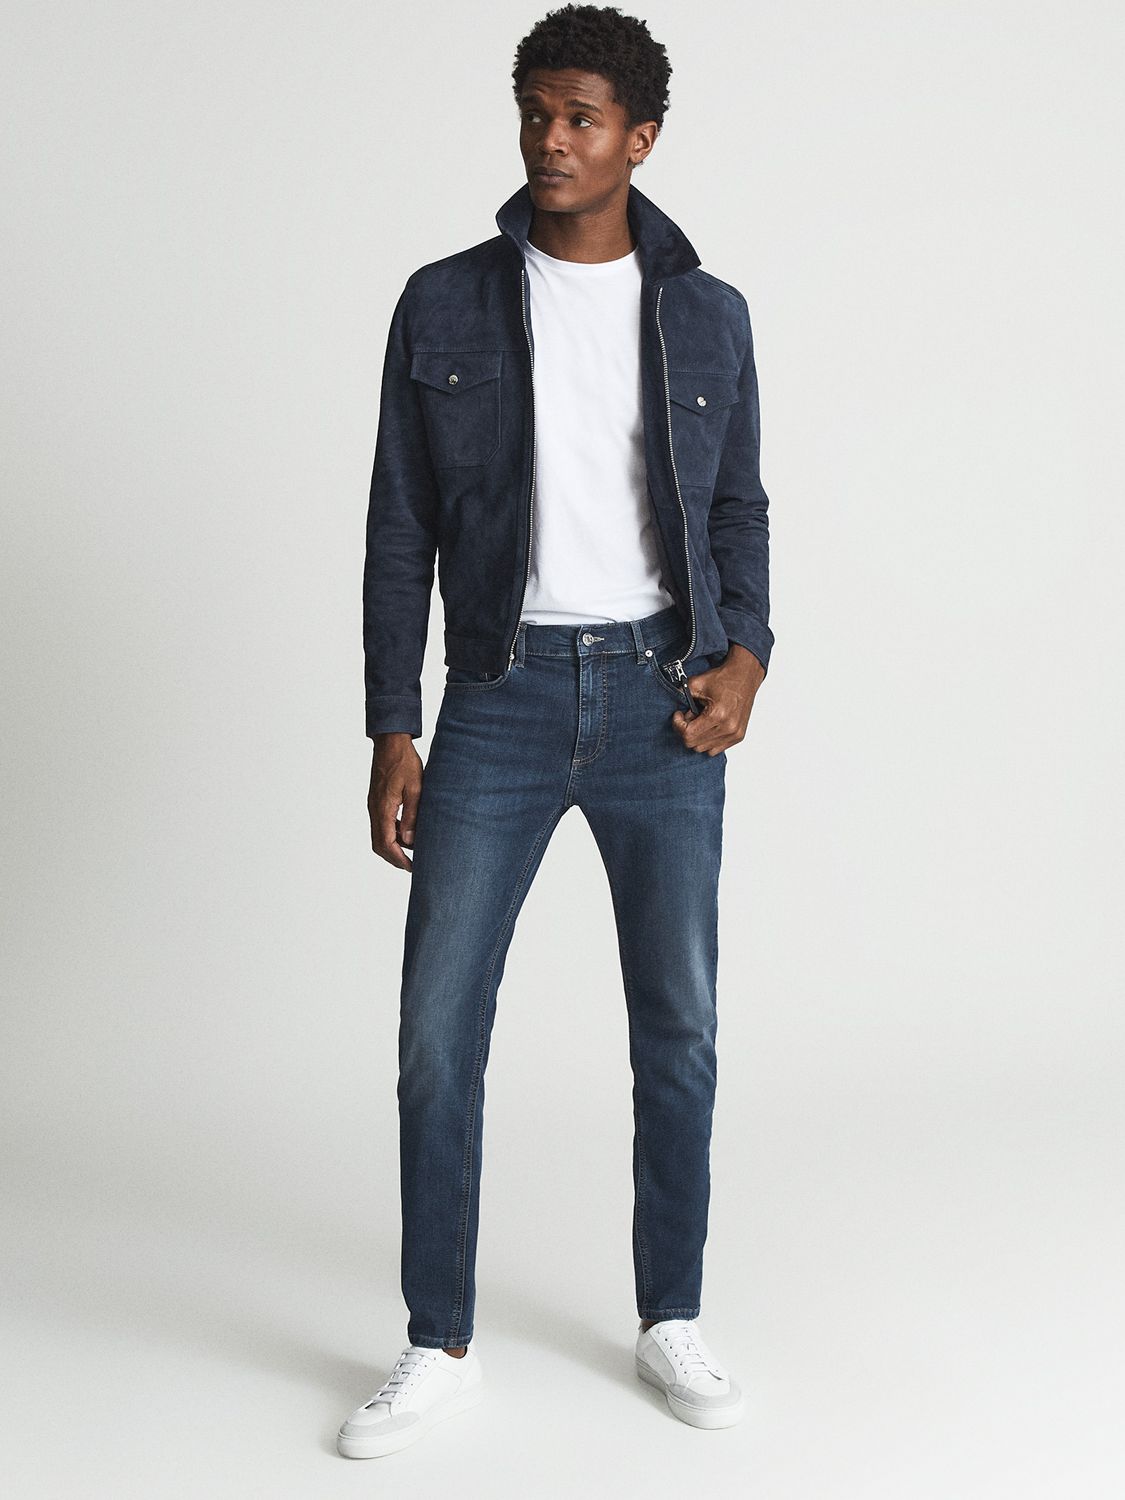 Reiss James Jersey Slim Fit Jeans at John Lewis & Partners